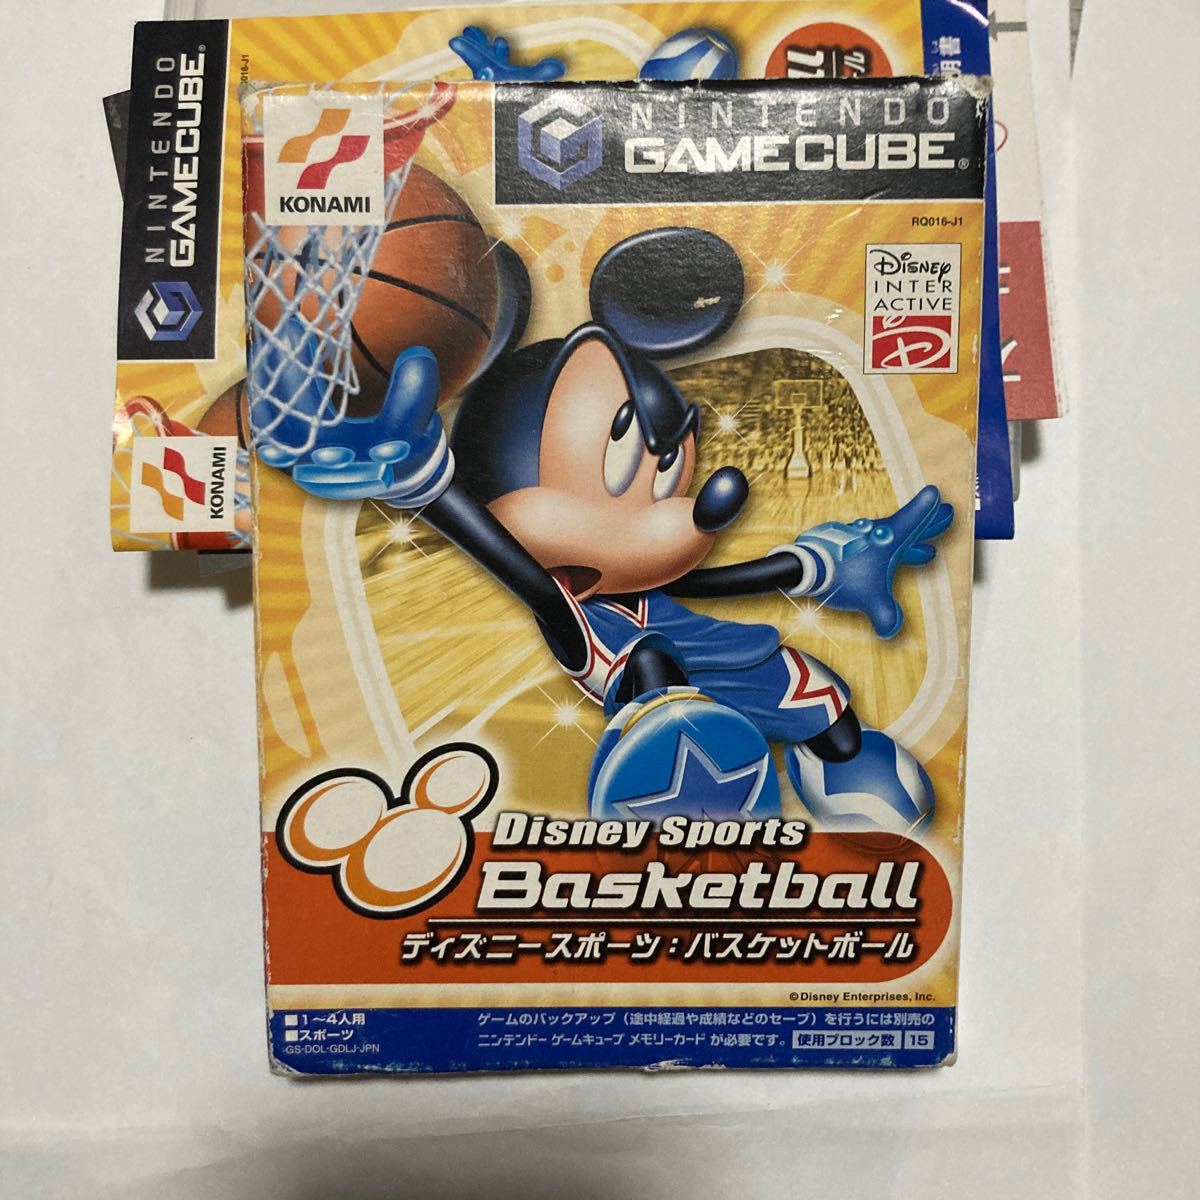  free shipping GG Game Cube Disney sport basketball post card etc. attached NINTENDO GAMECUBE Disney Sports Basketball nintendo 